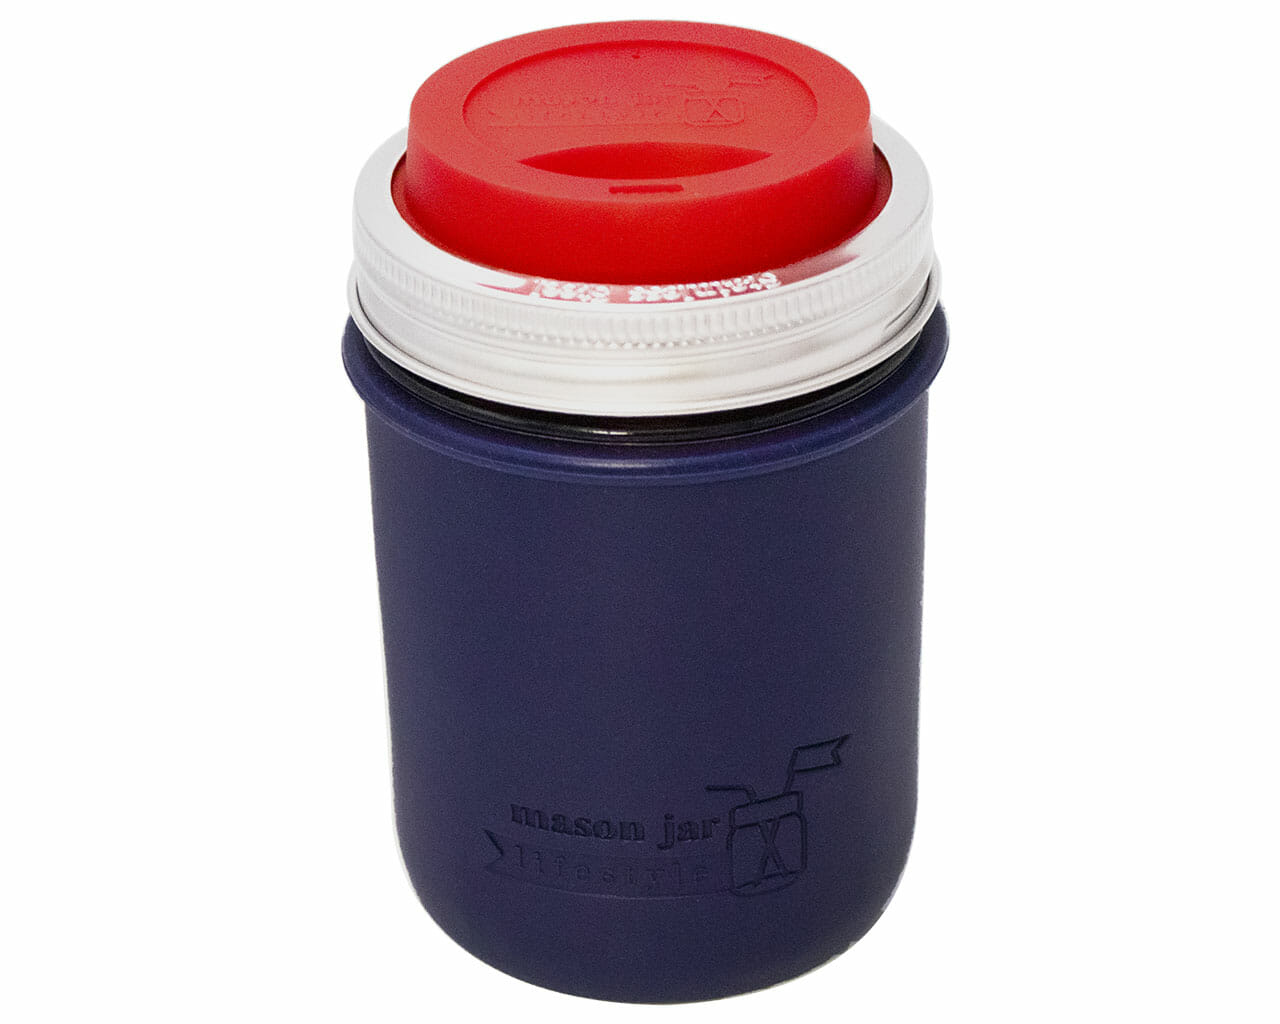 midnight blue Silicone Sleeve with cherry red drinking lid for wide mouth 16oz mason jars